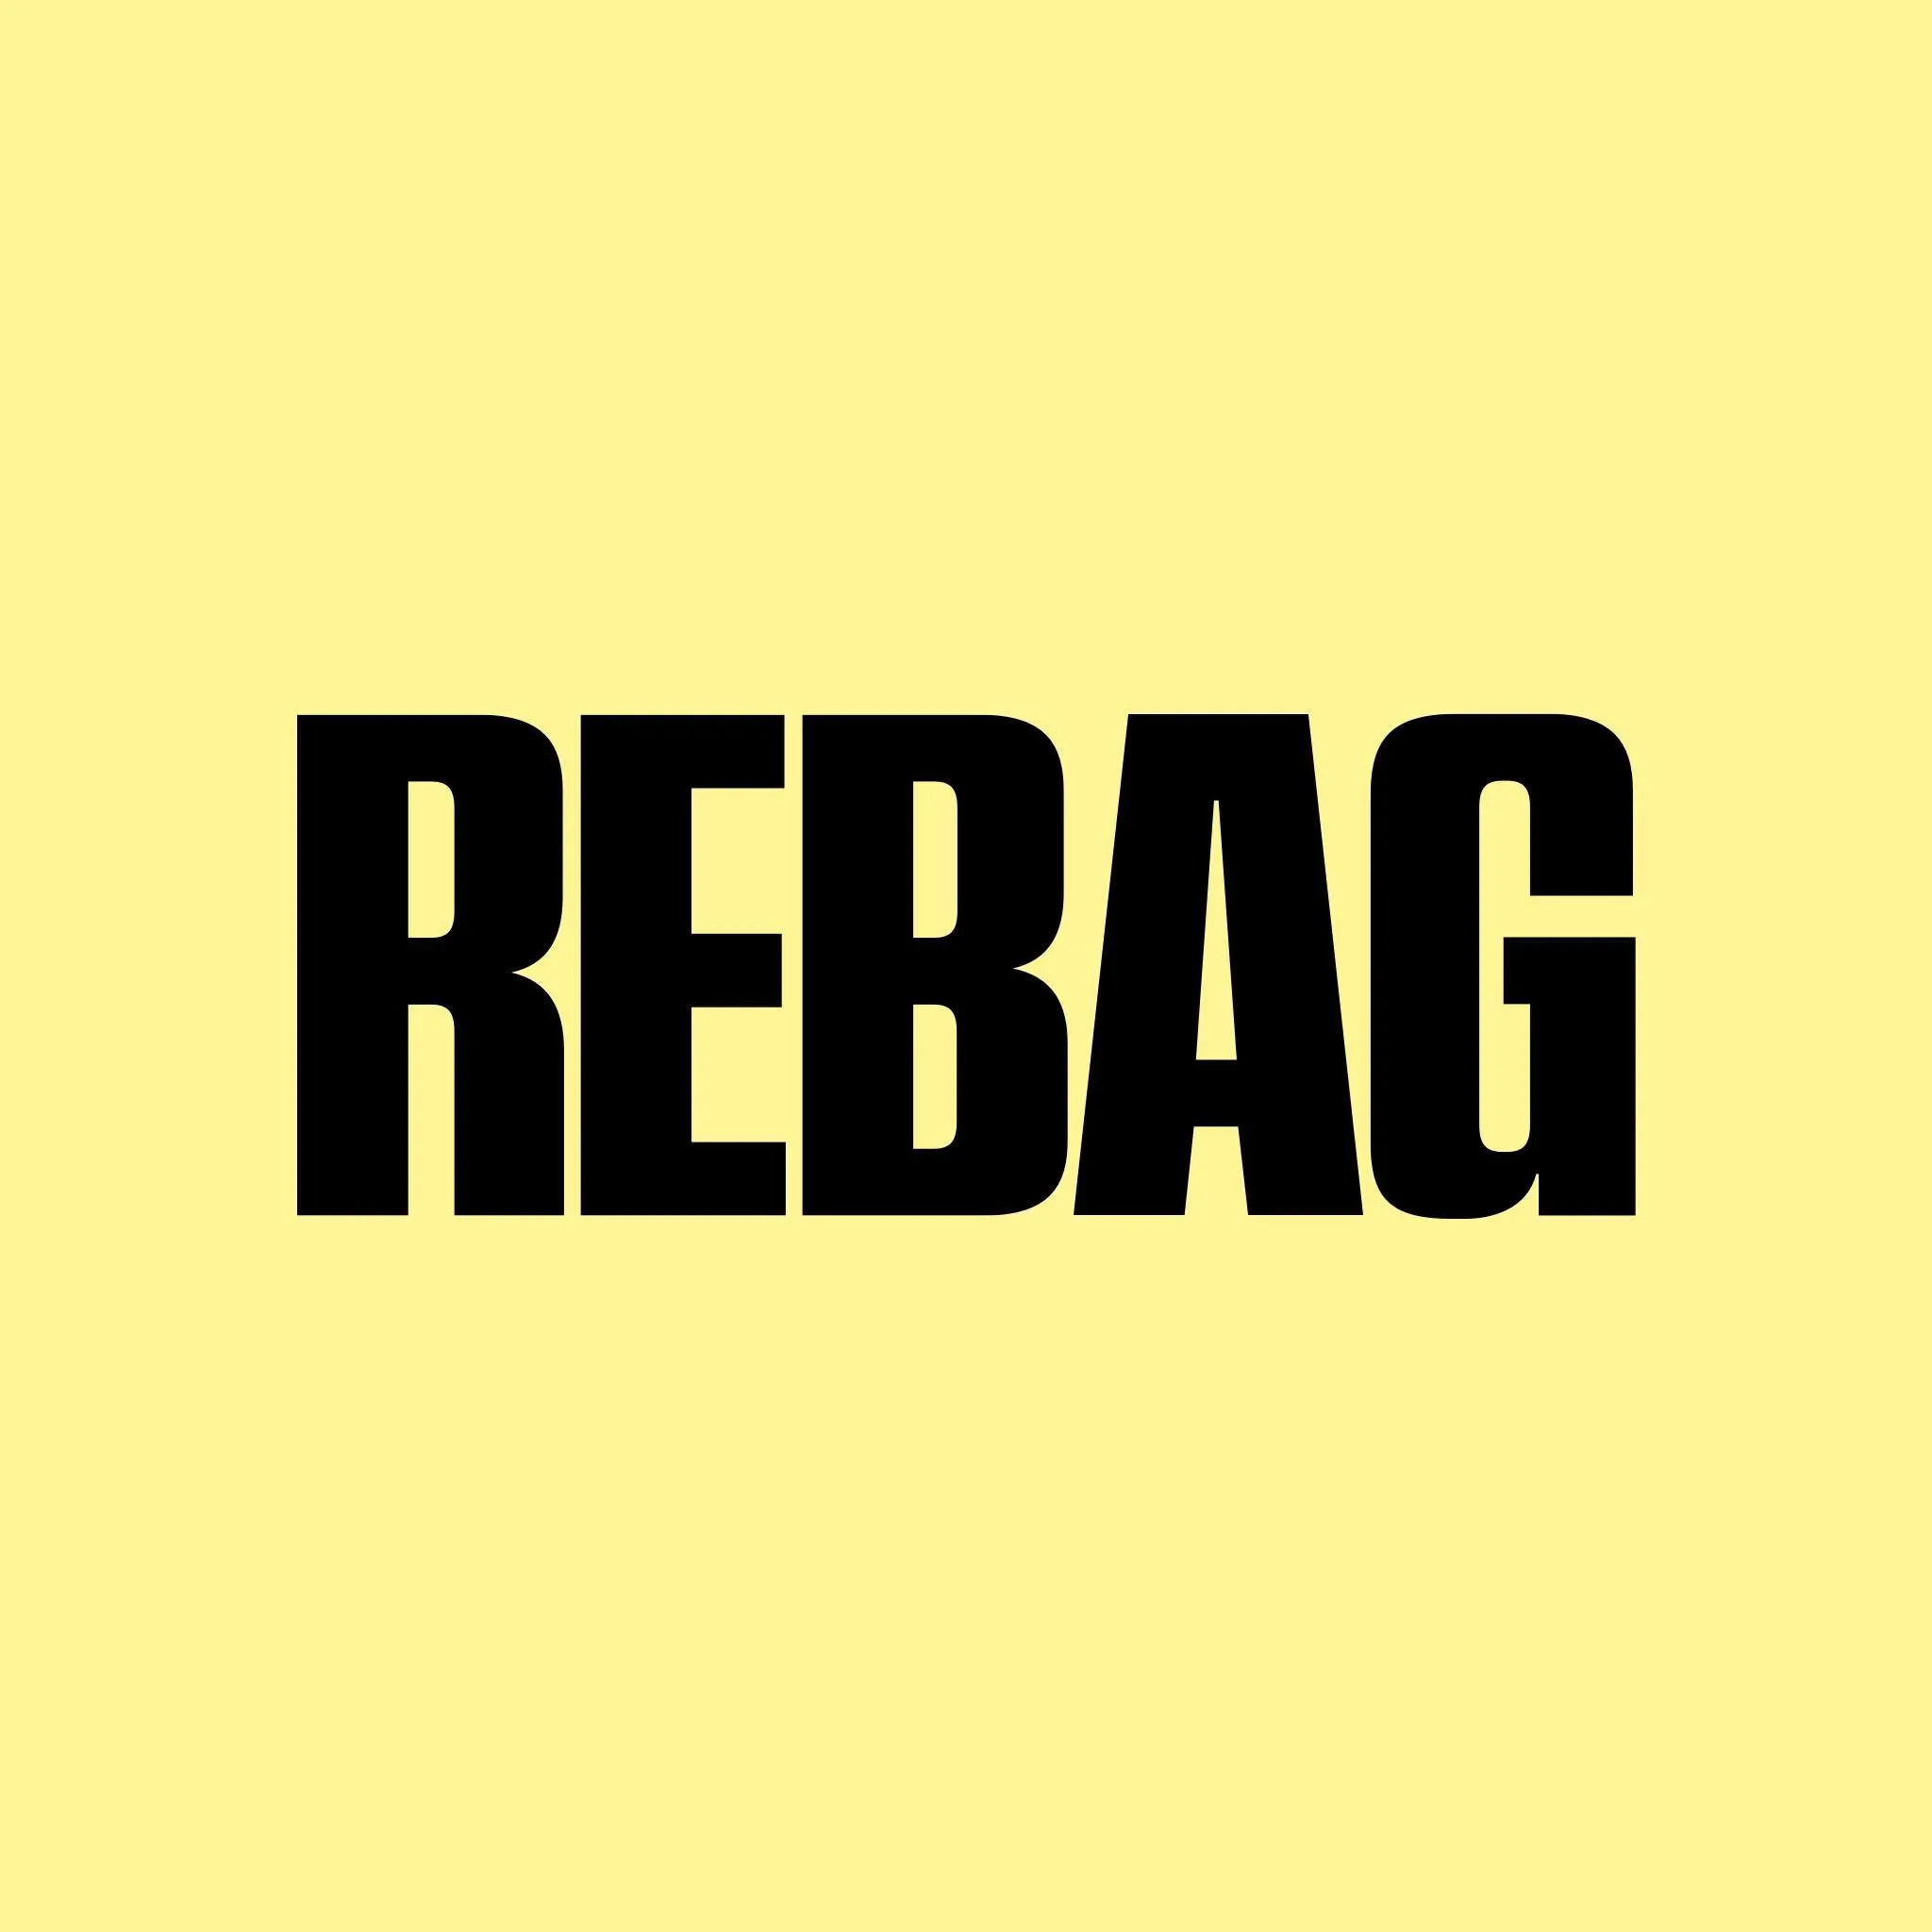 Using Image Recognition Technology, Rebag's New Clair AI Makes It Easier To  Sell Your Luxury Handbags